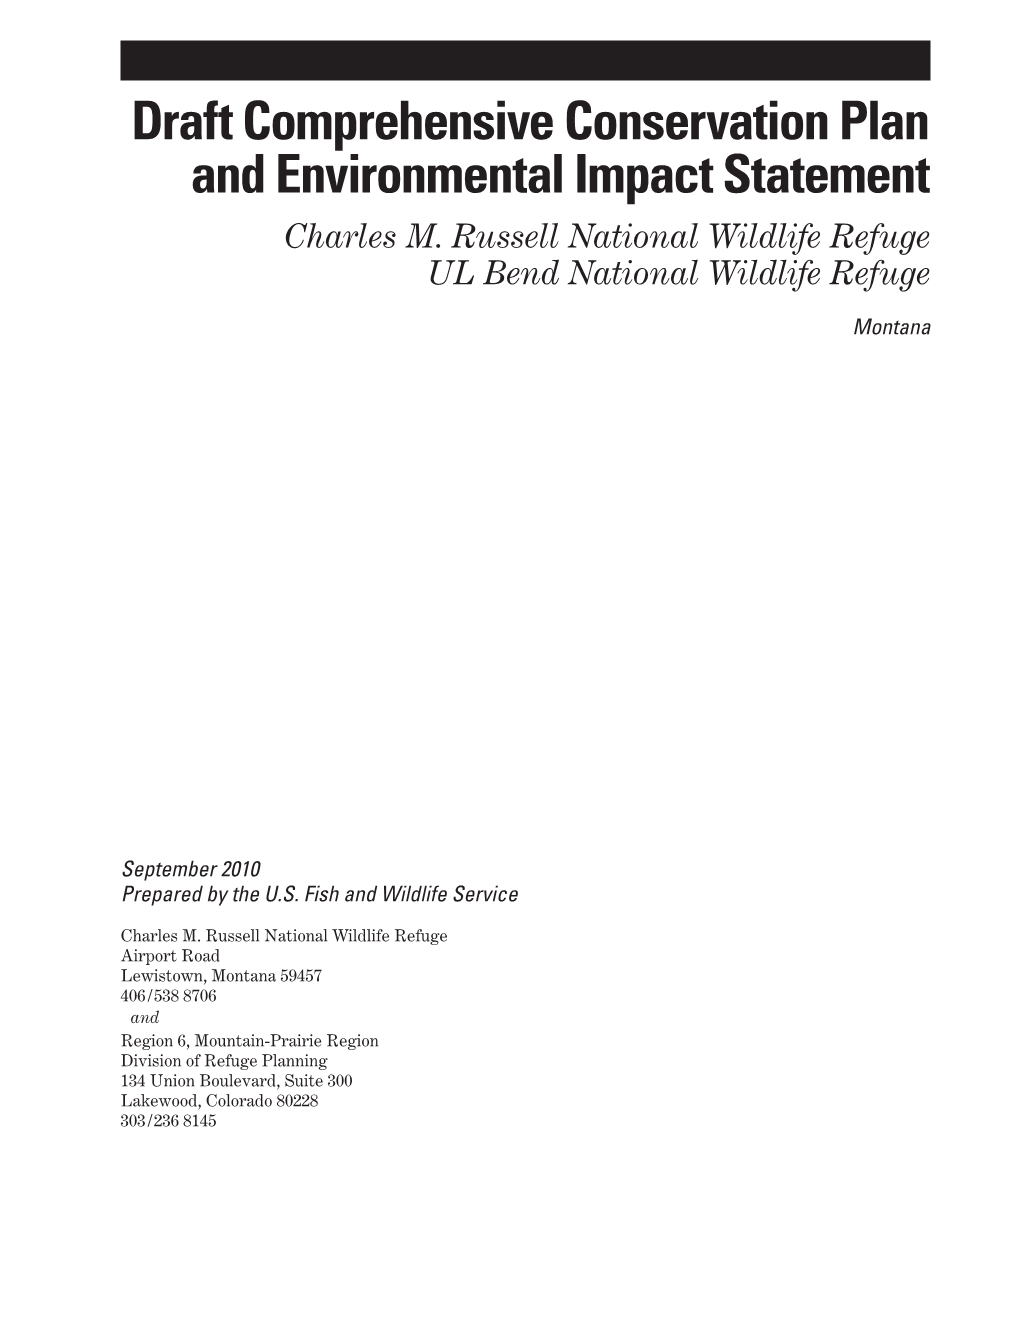 Draft Comprehensive Conservation Plan and Environmental Impact Statement Charles M